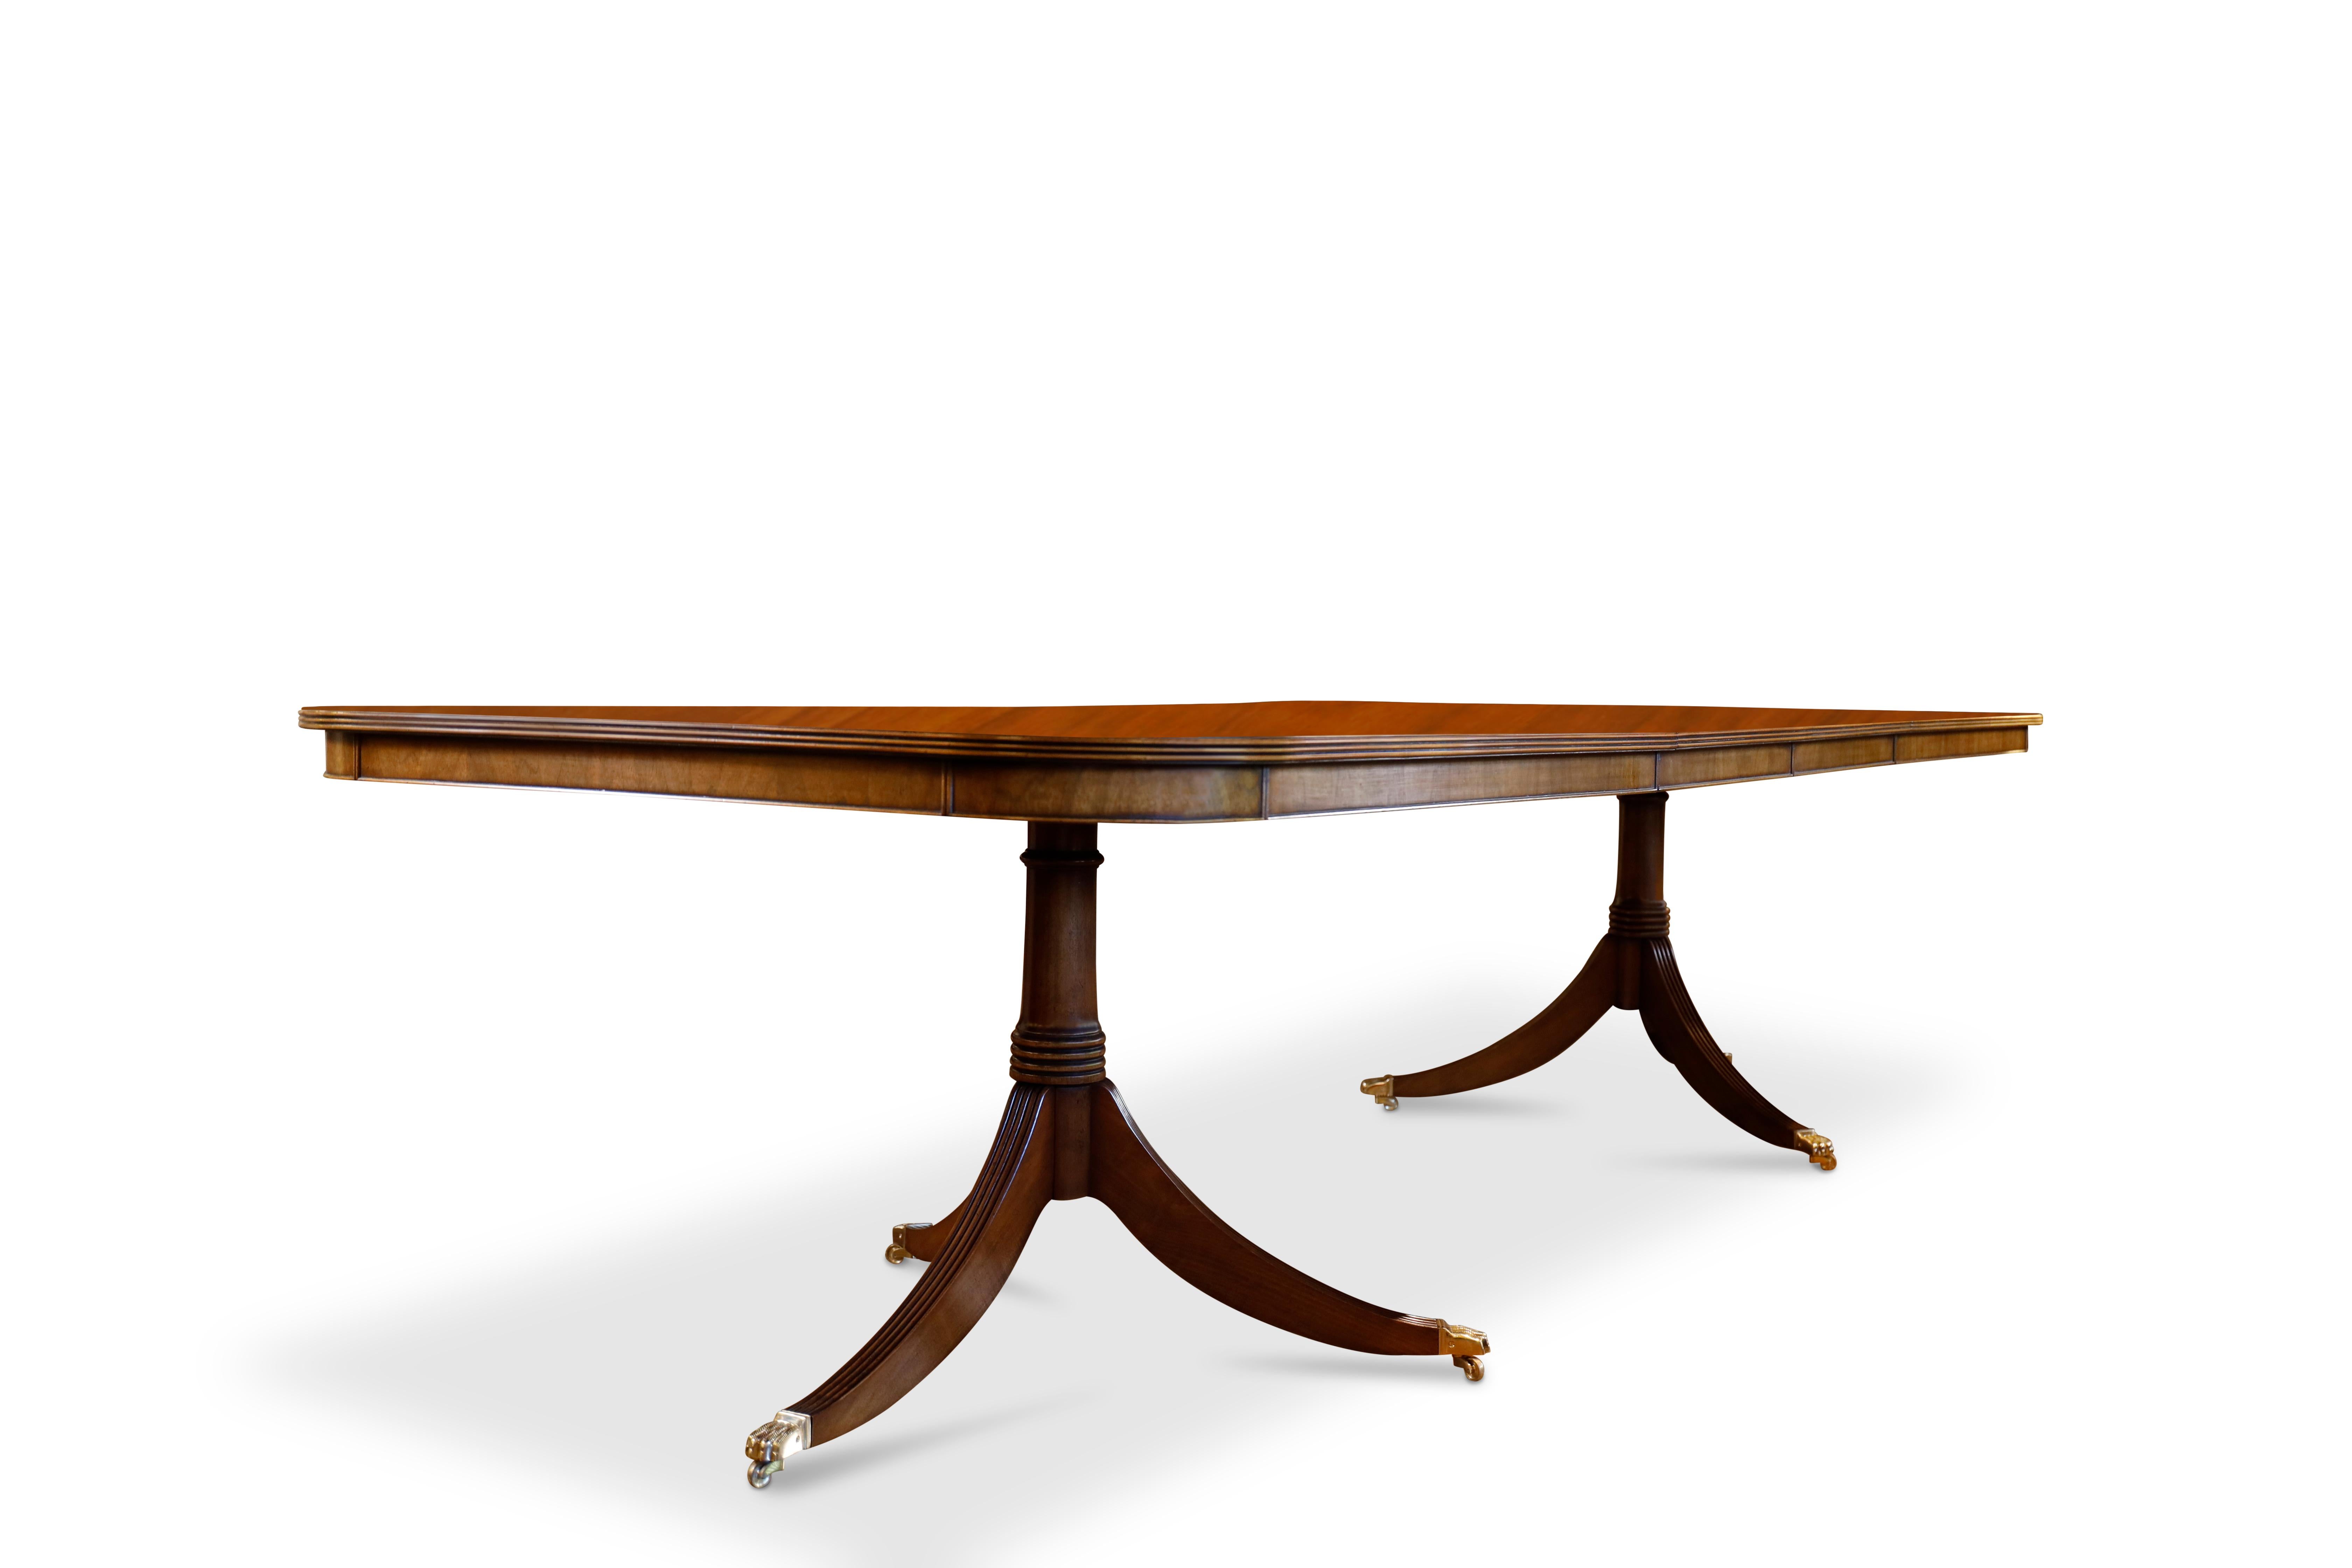 Regency style two-pedestal, two-leaf walnut dining table with burl walnut crossbanding, beaded edge, and walnut apron.  Cannon turned single column pedestals with reeded legs ending in brass 